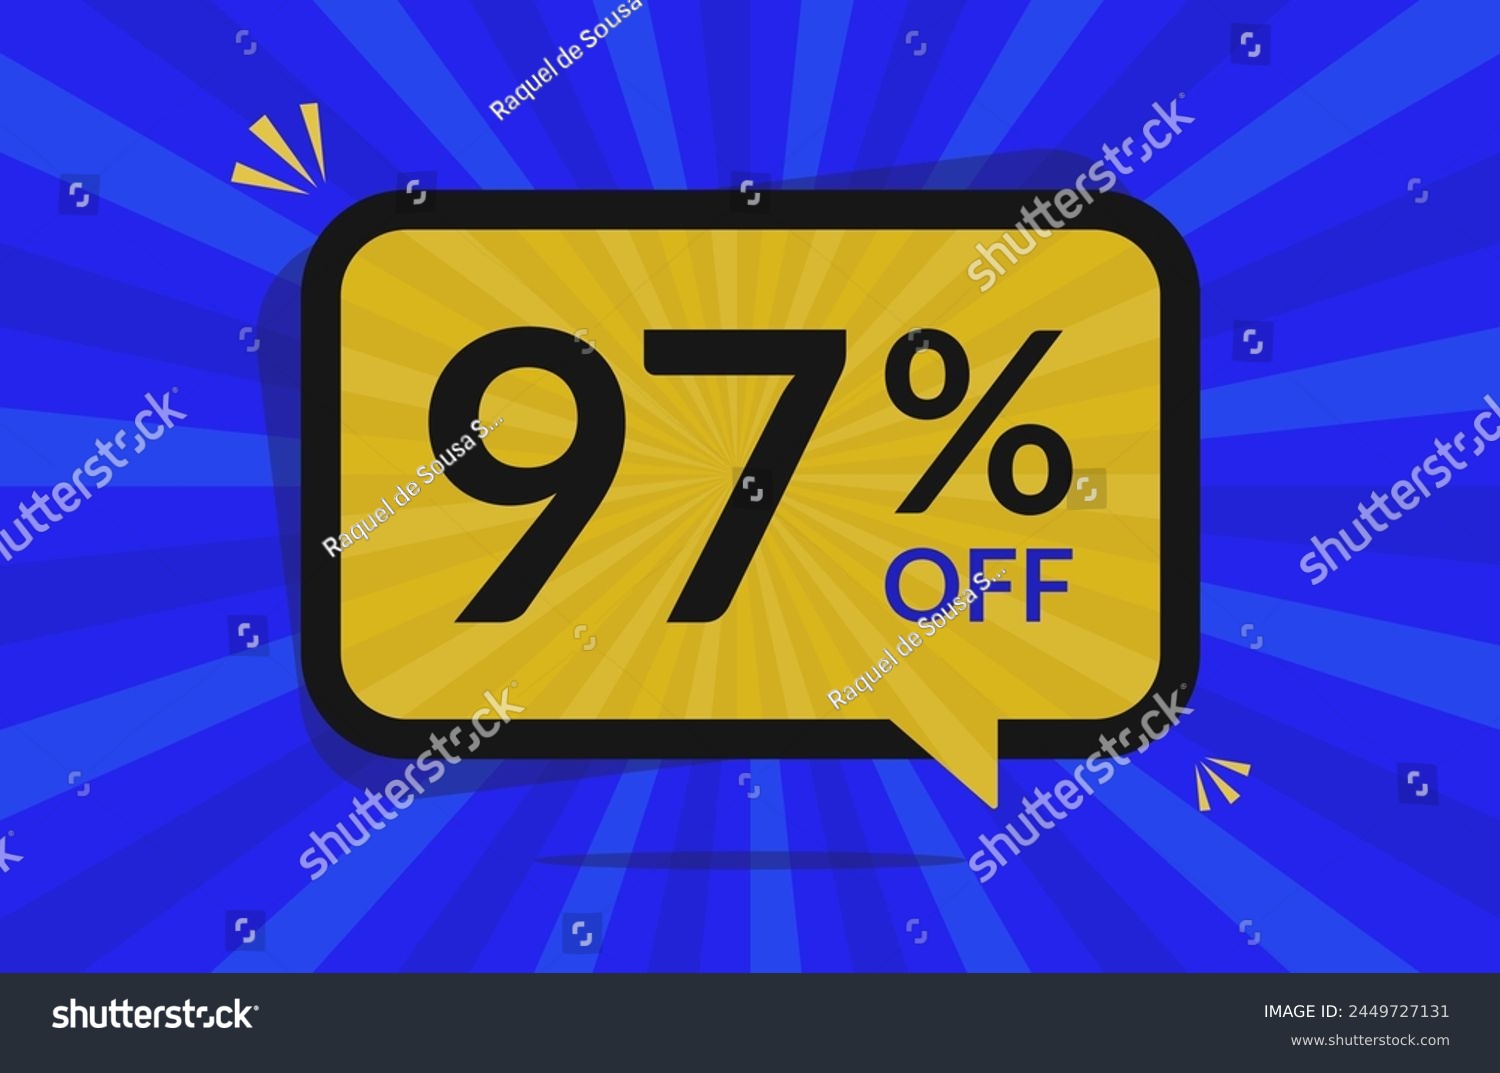 SVG of 97 percent off. 97% discount. Blue and Yellow banner with floating balloon for promotions and offers. svg